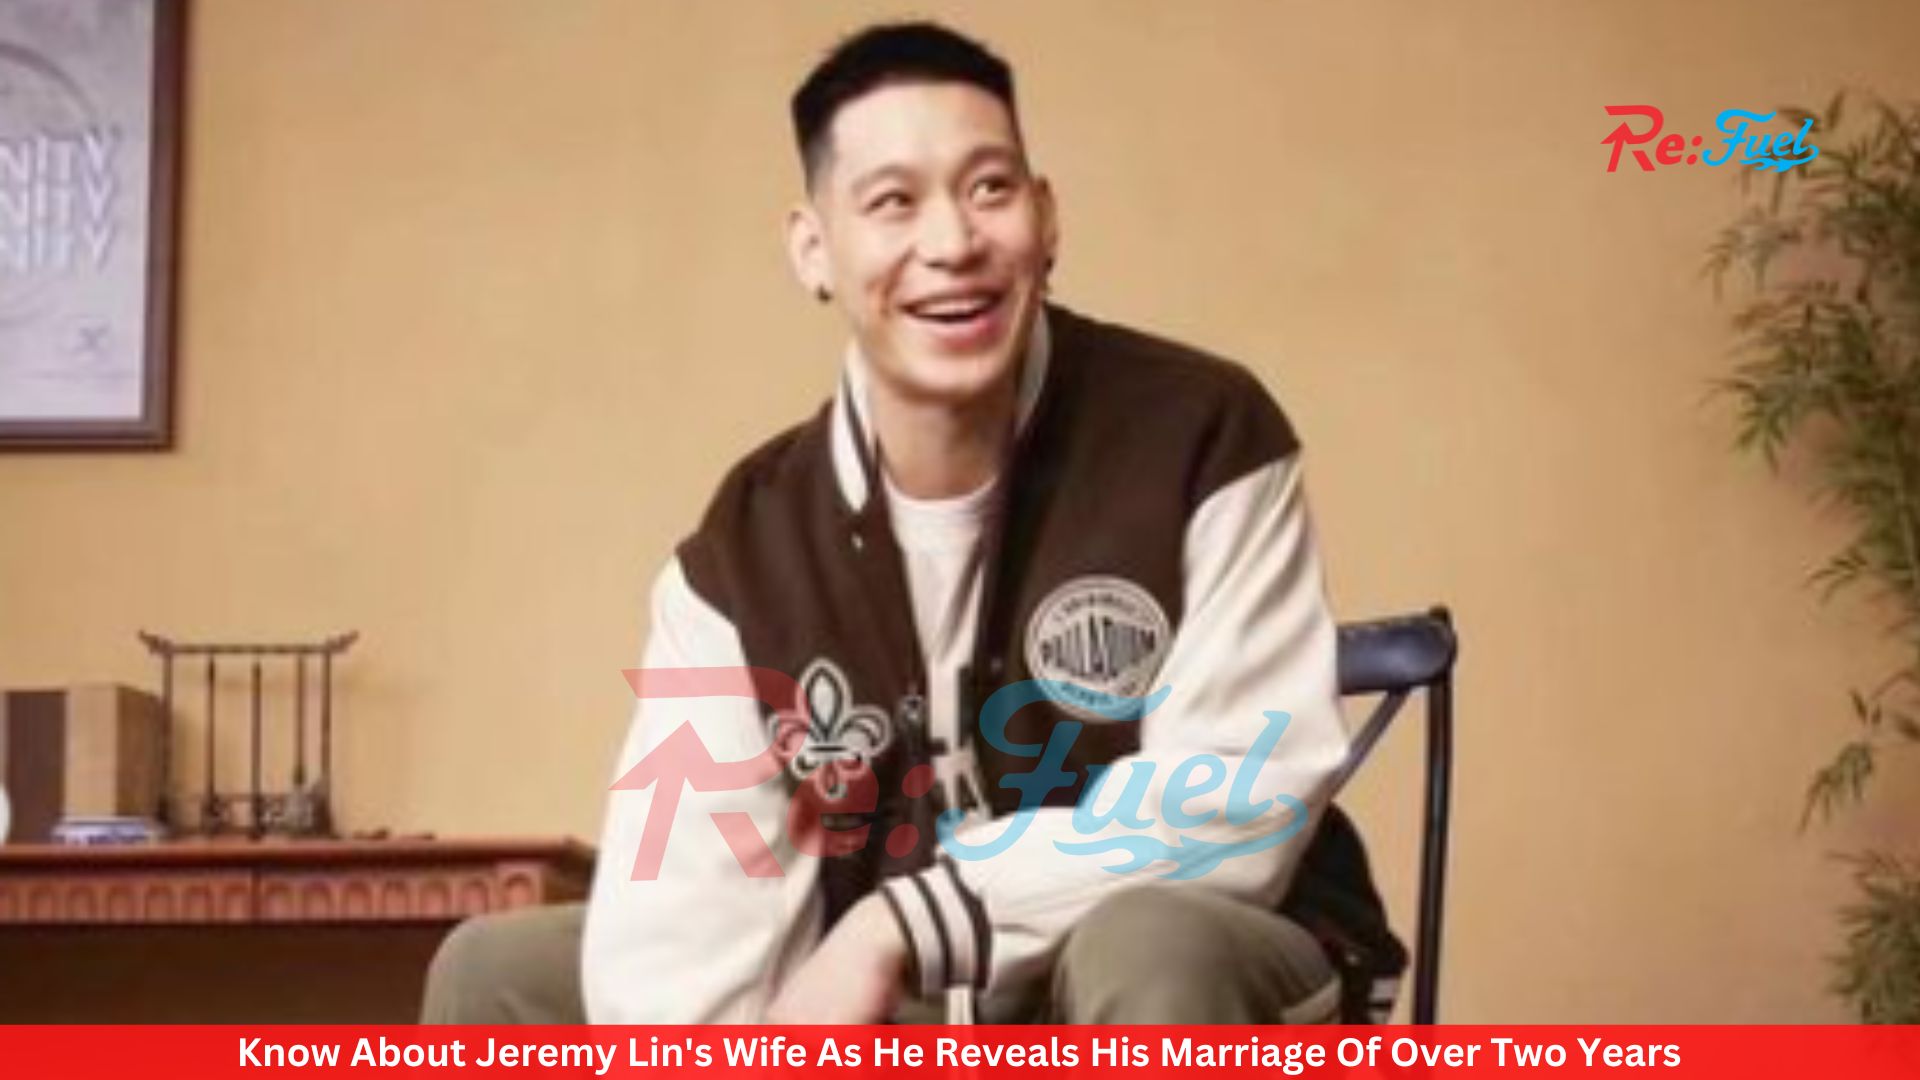 Know About Jeremy Lin's Wife As He Reveals His Marriage Of Over Two Years